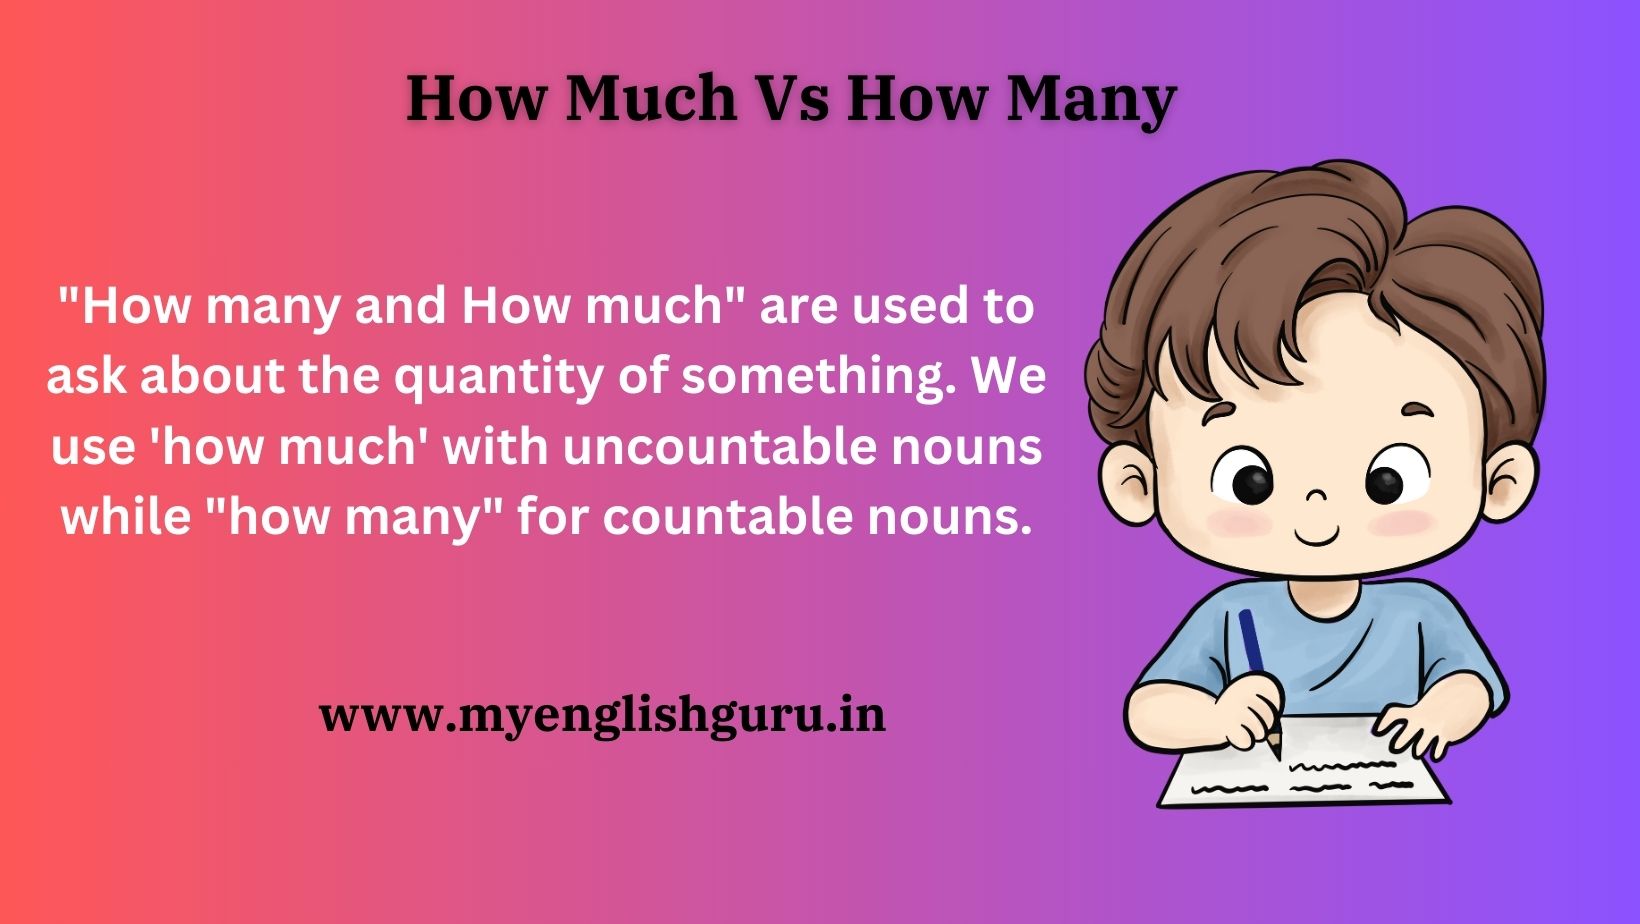 What is the difference between how much and how many?